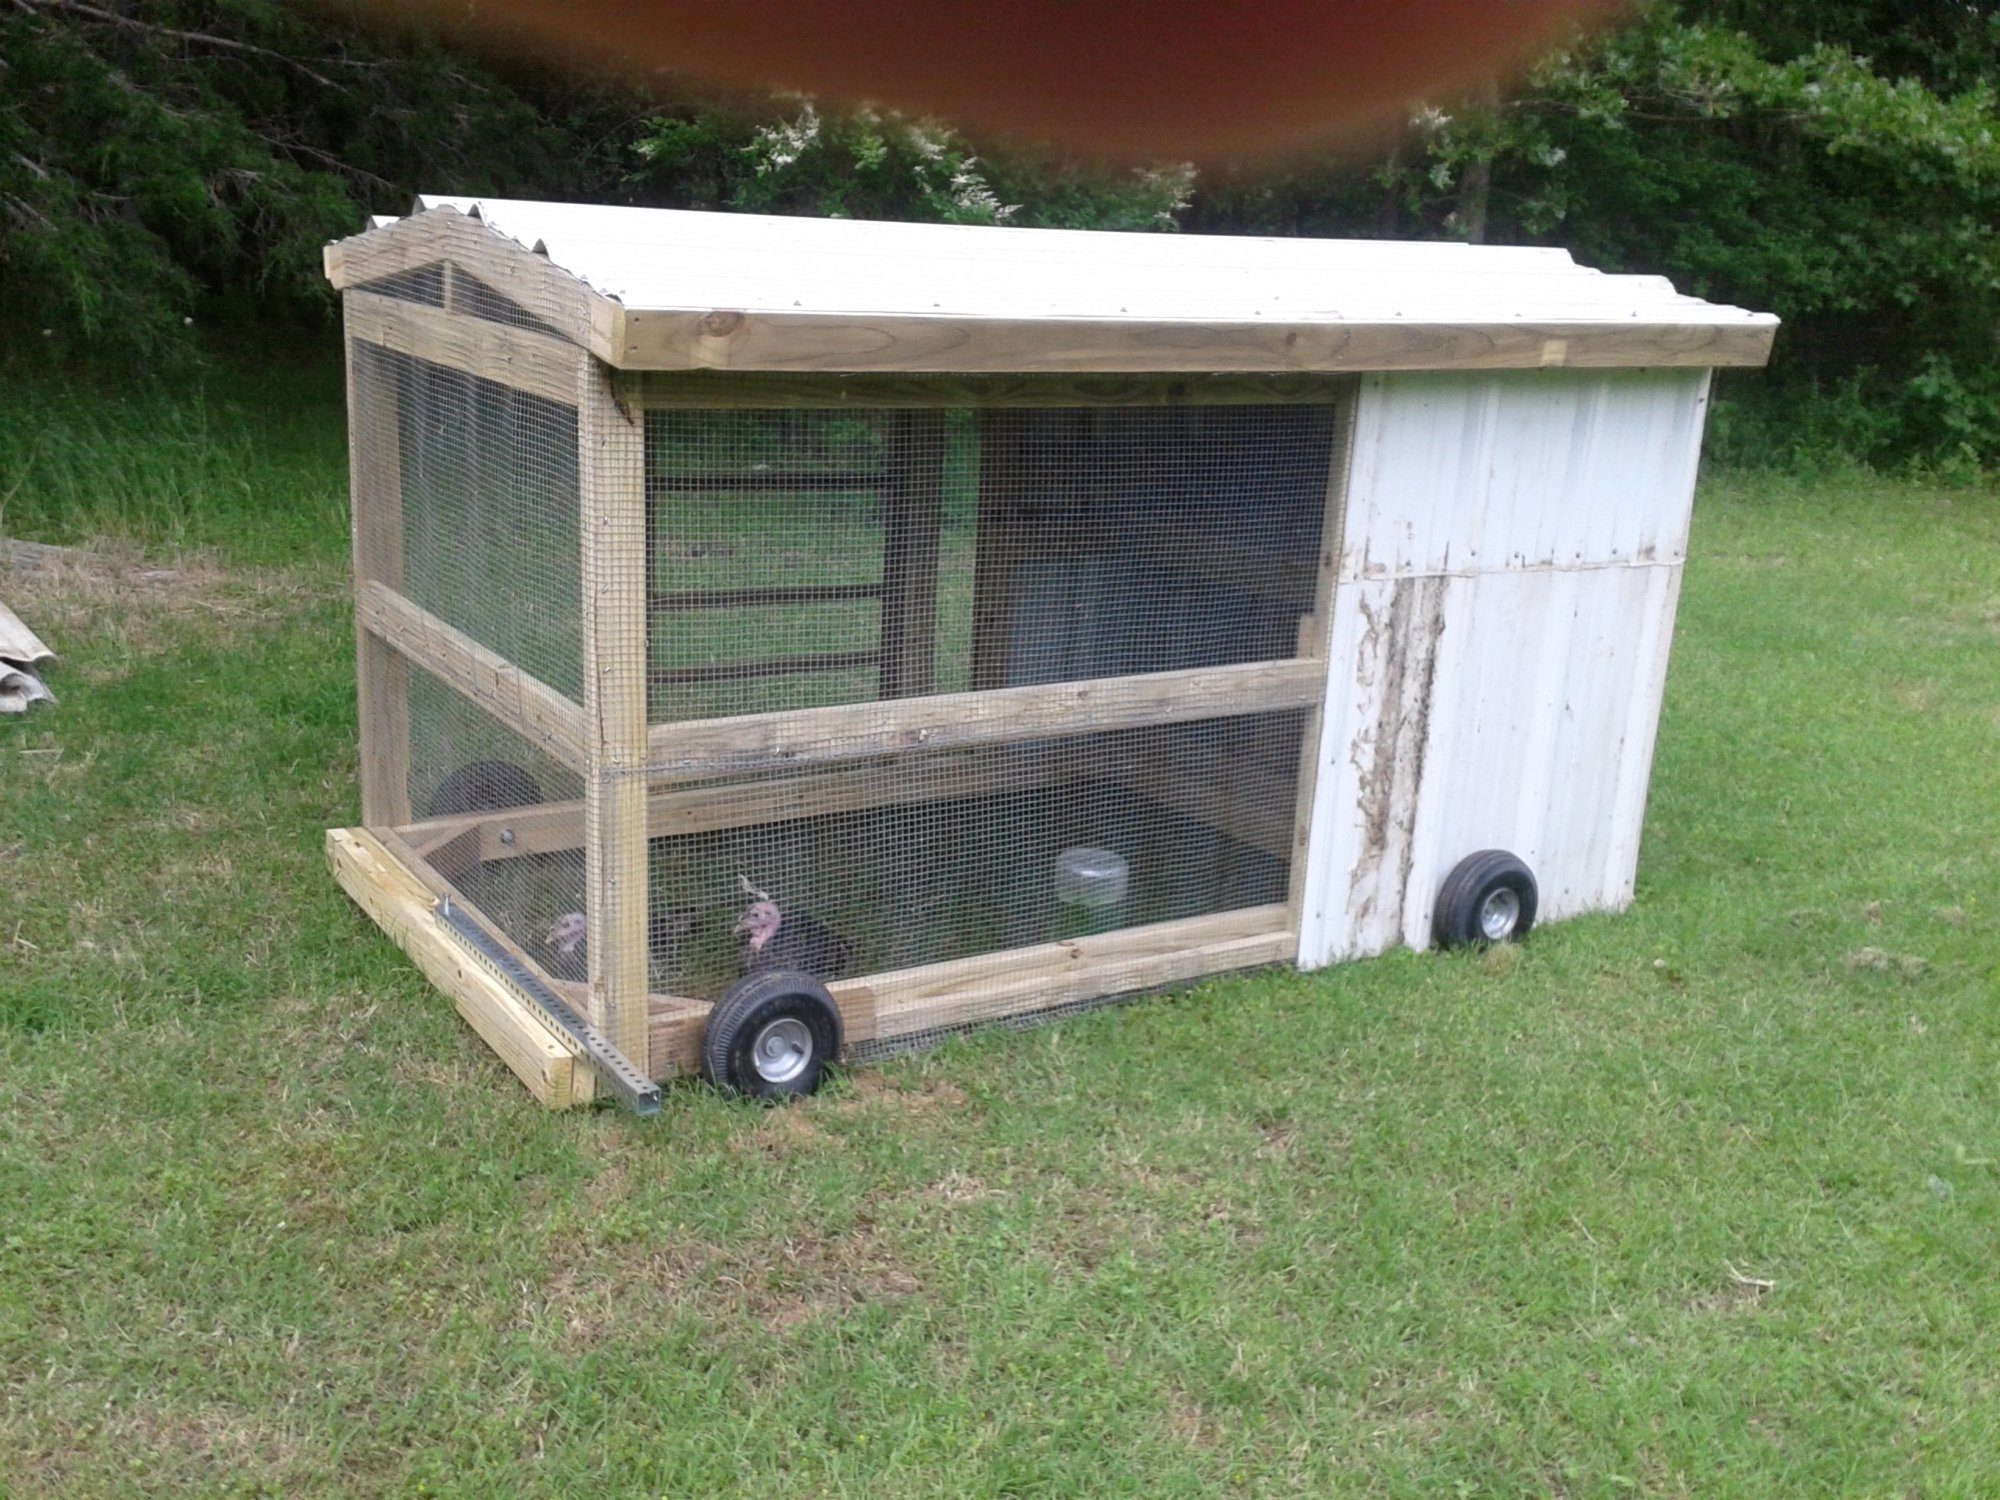 This is actually a Chicken Tractor, but I refer to it as my turkey run.